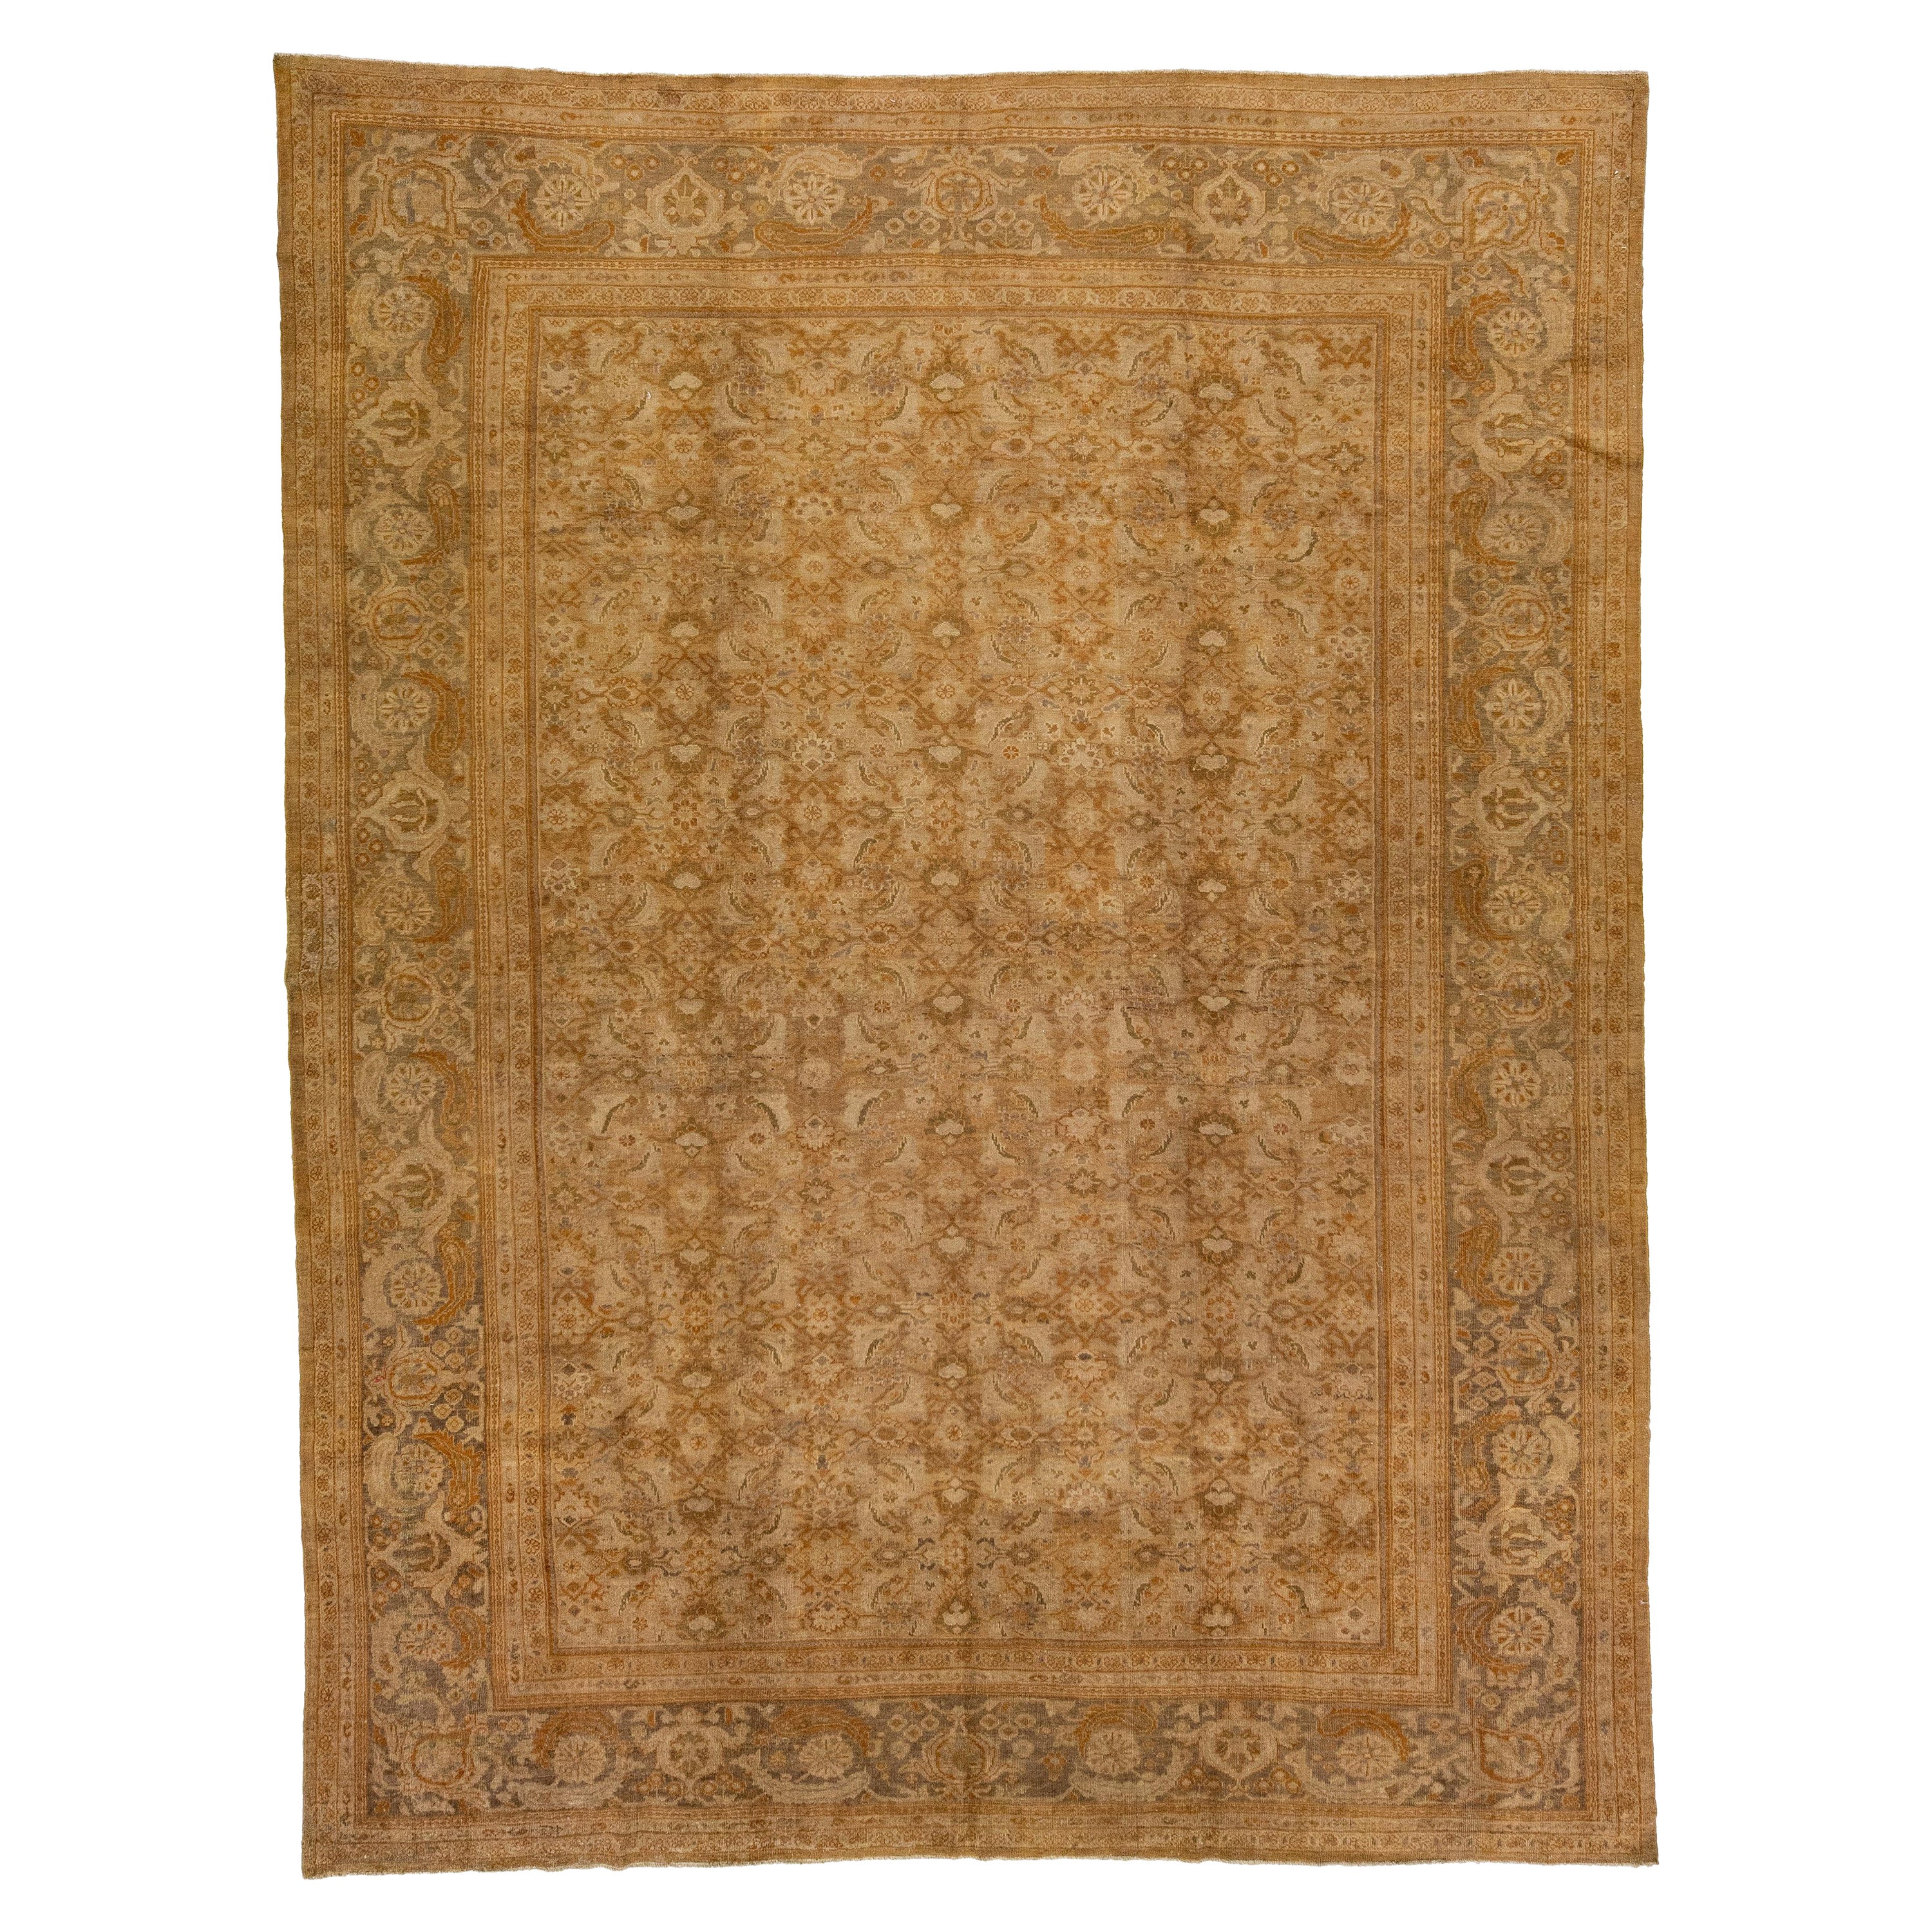 Antique Sultanabad Handmade Tan Wool Rug with Allover Floral Design For Sale